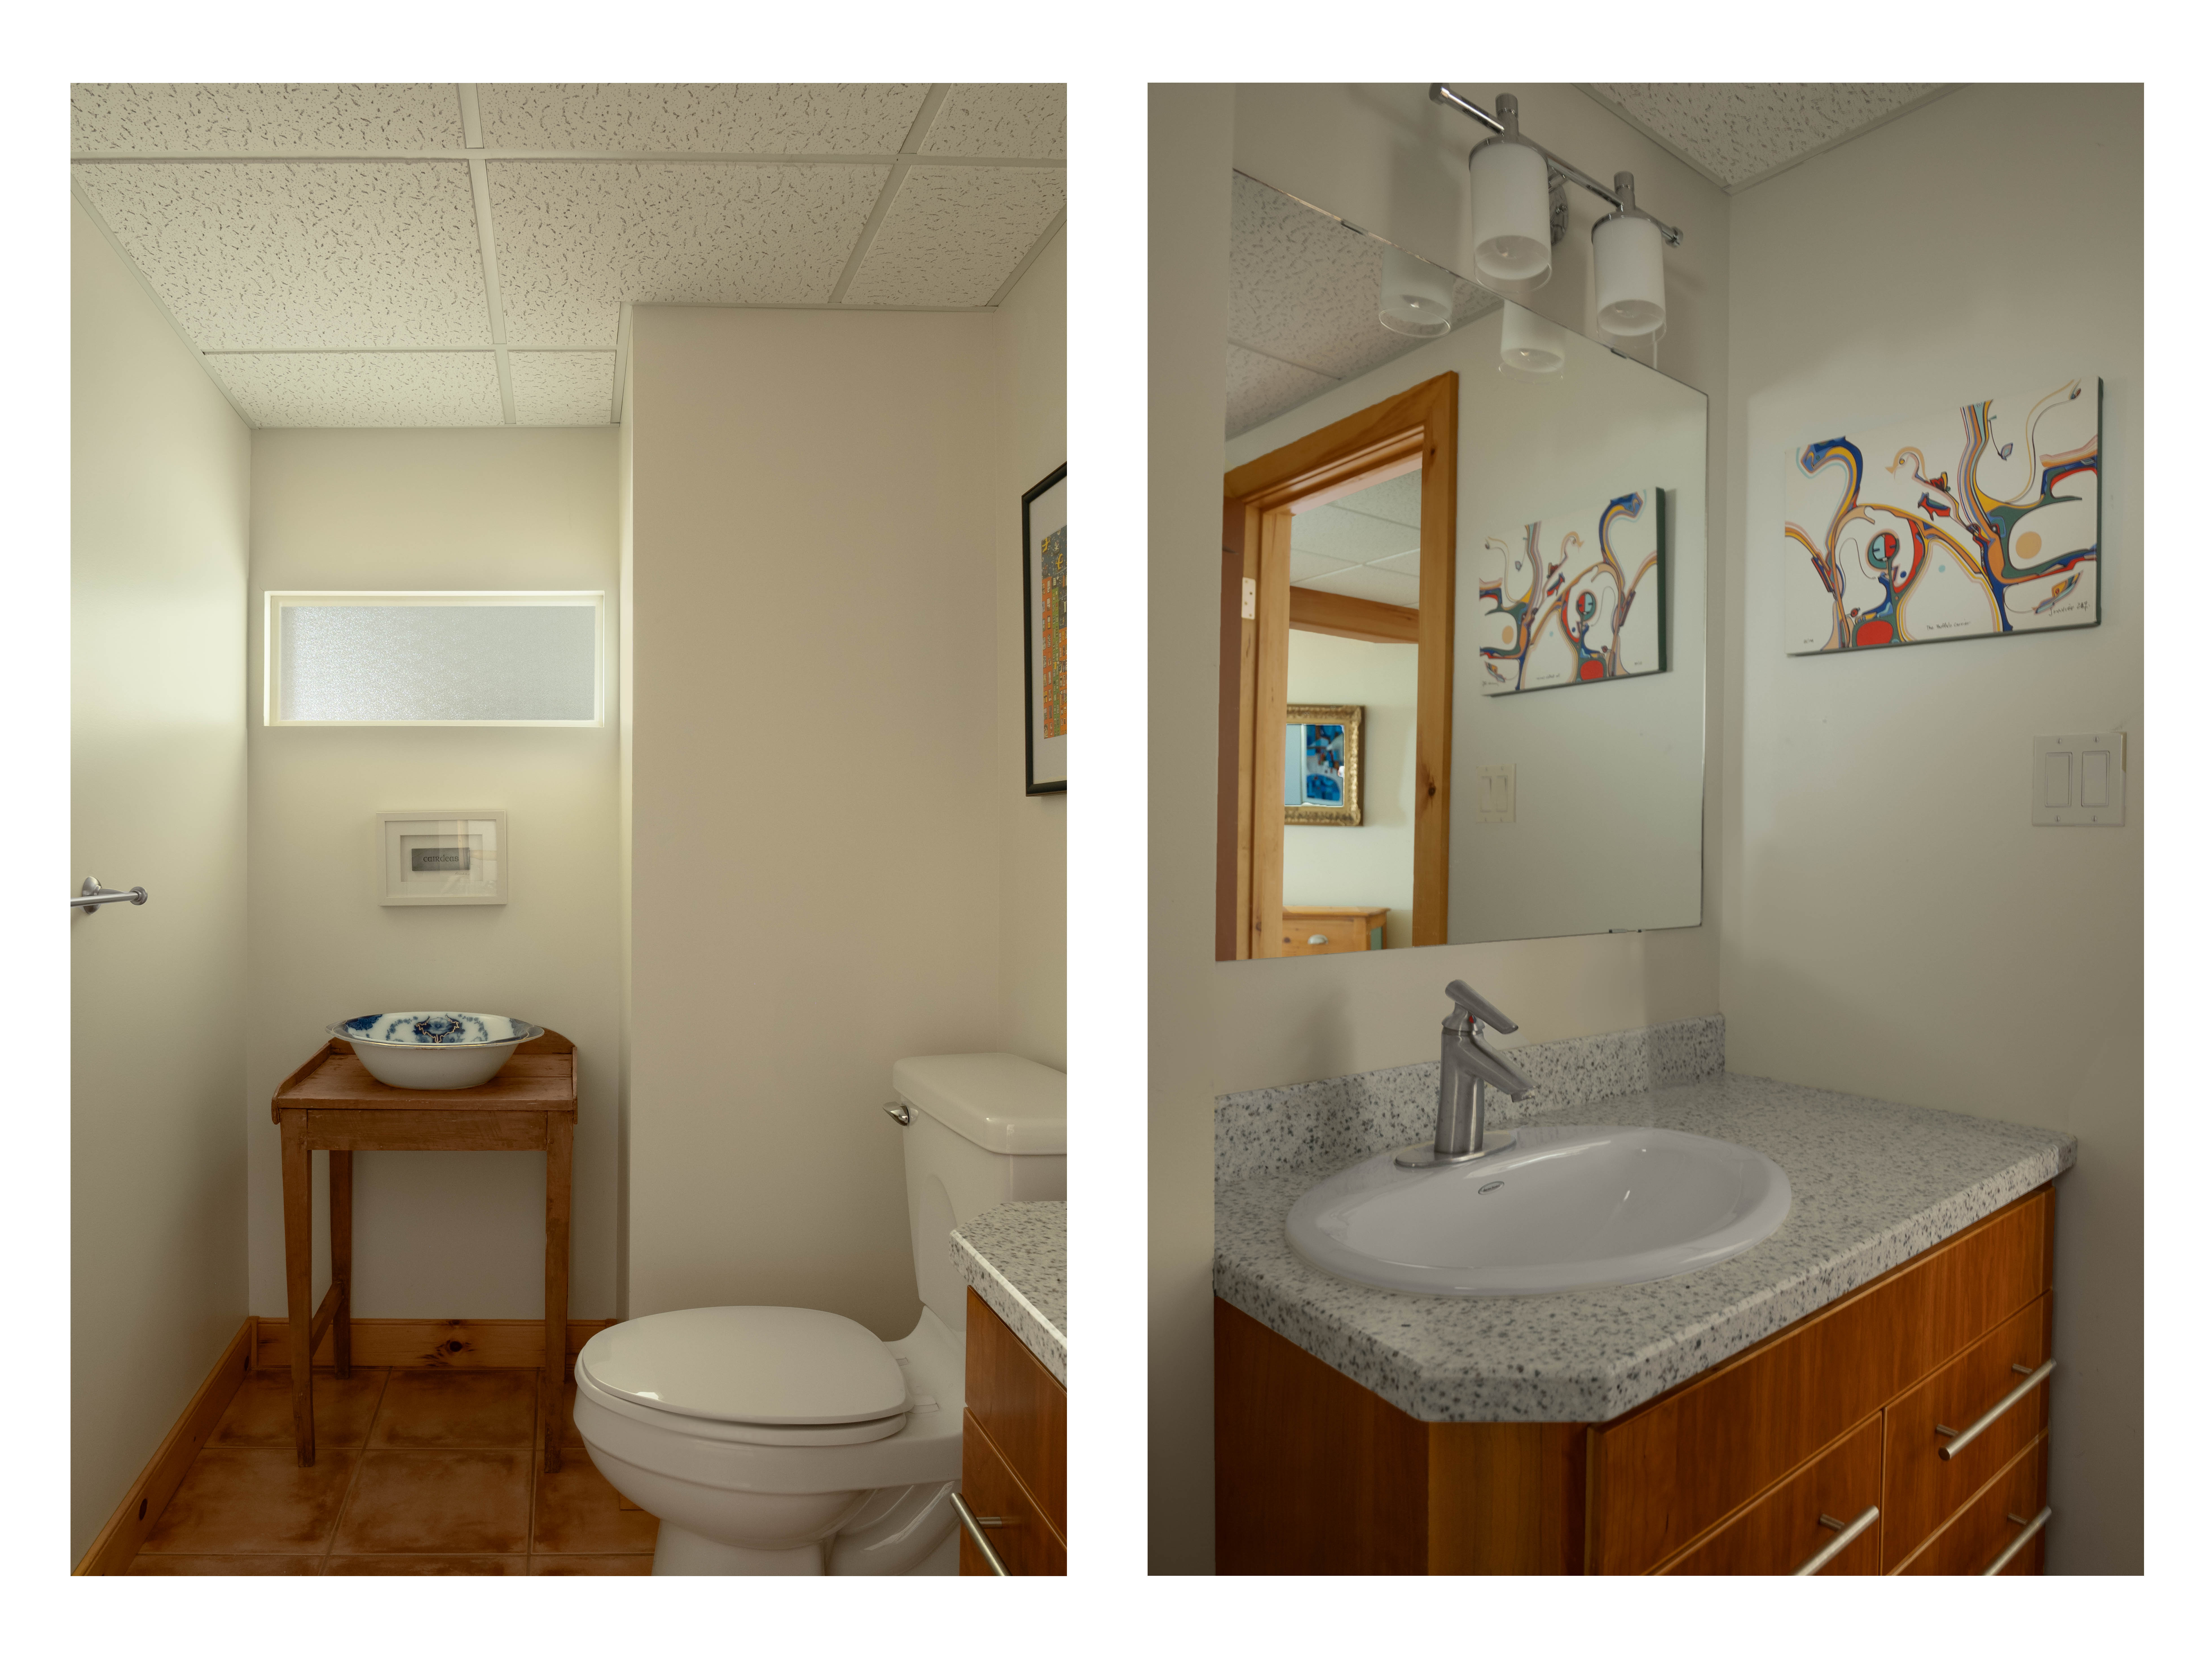 Two images, showing two different angles of a bathroom. The first image shows a toilet, a small table, and a window. The second image shows a sink with a mirror hanging above.